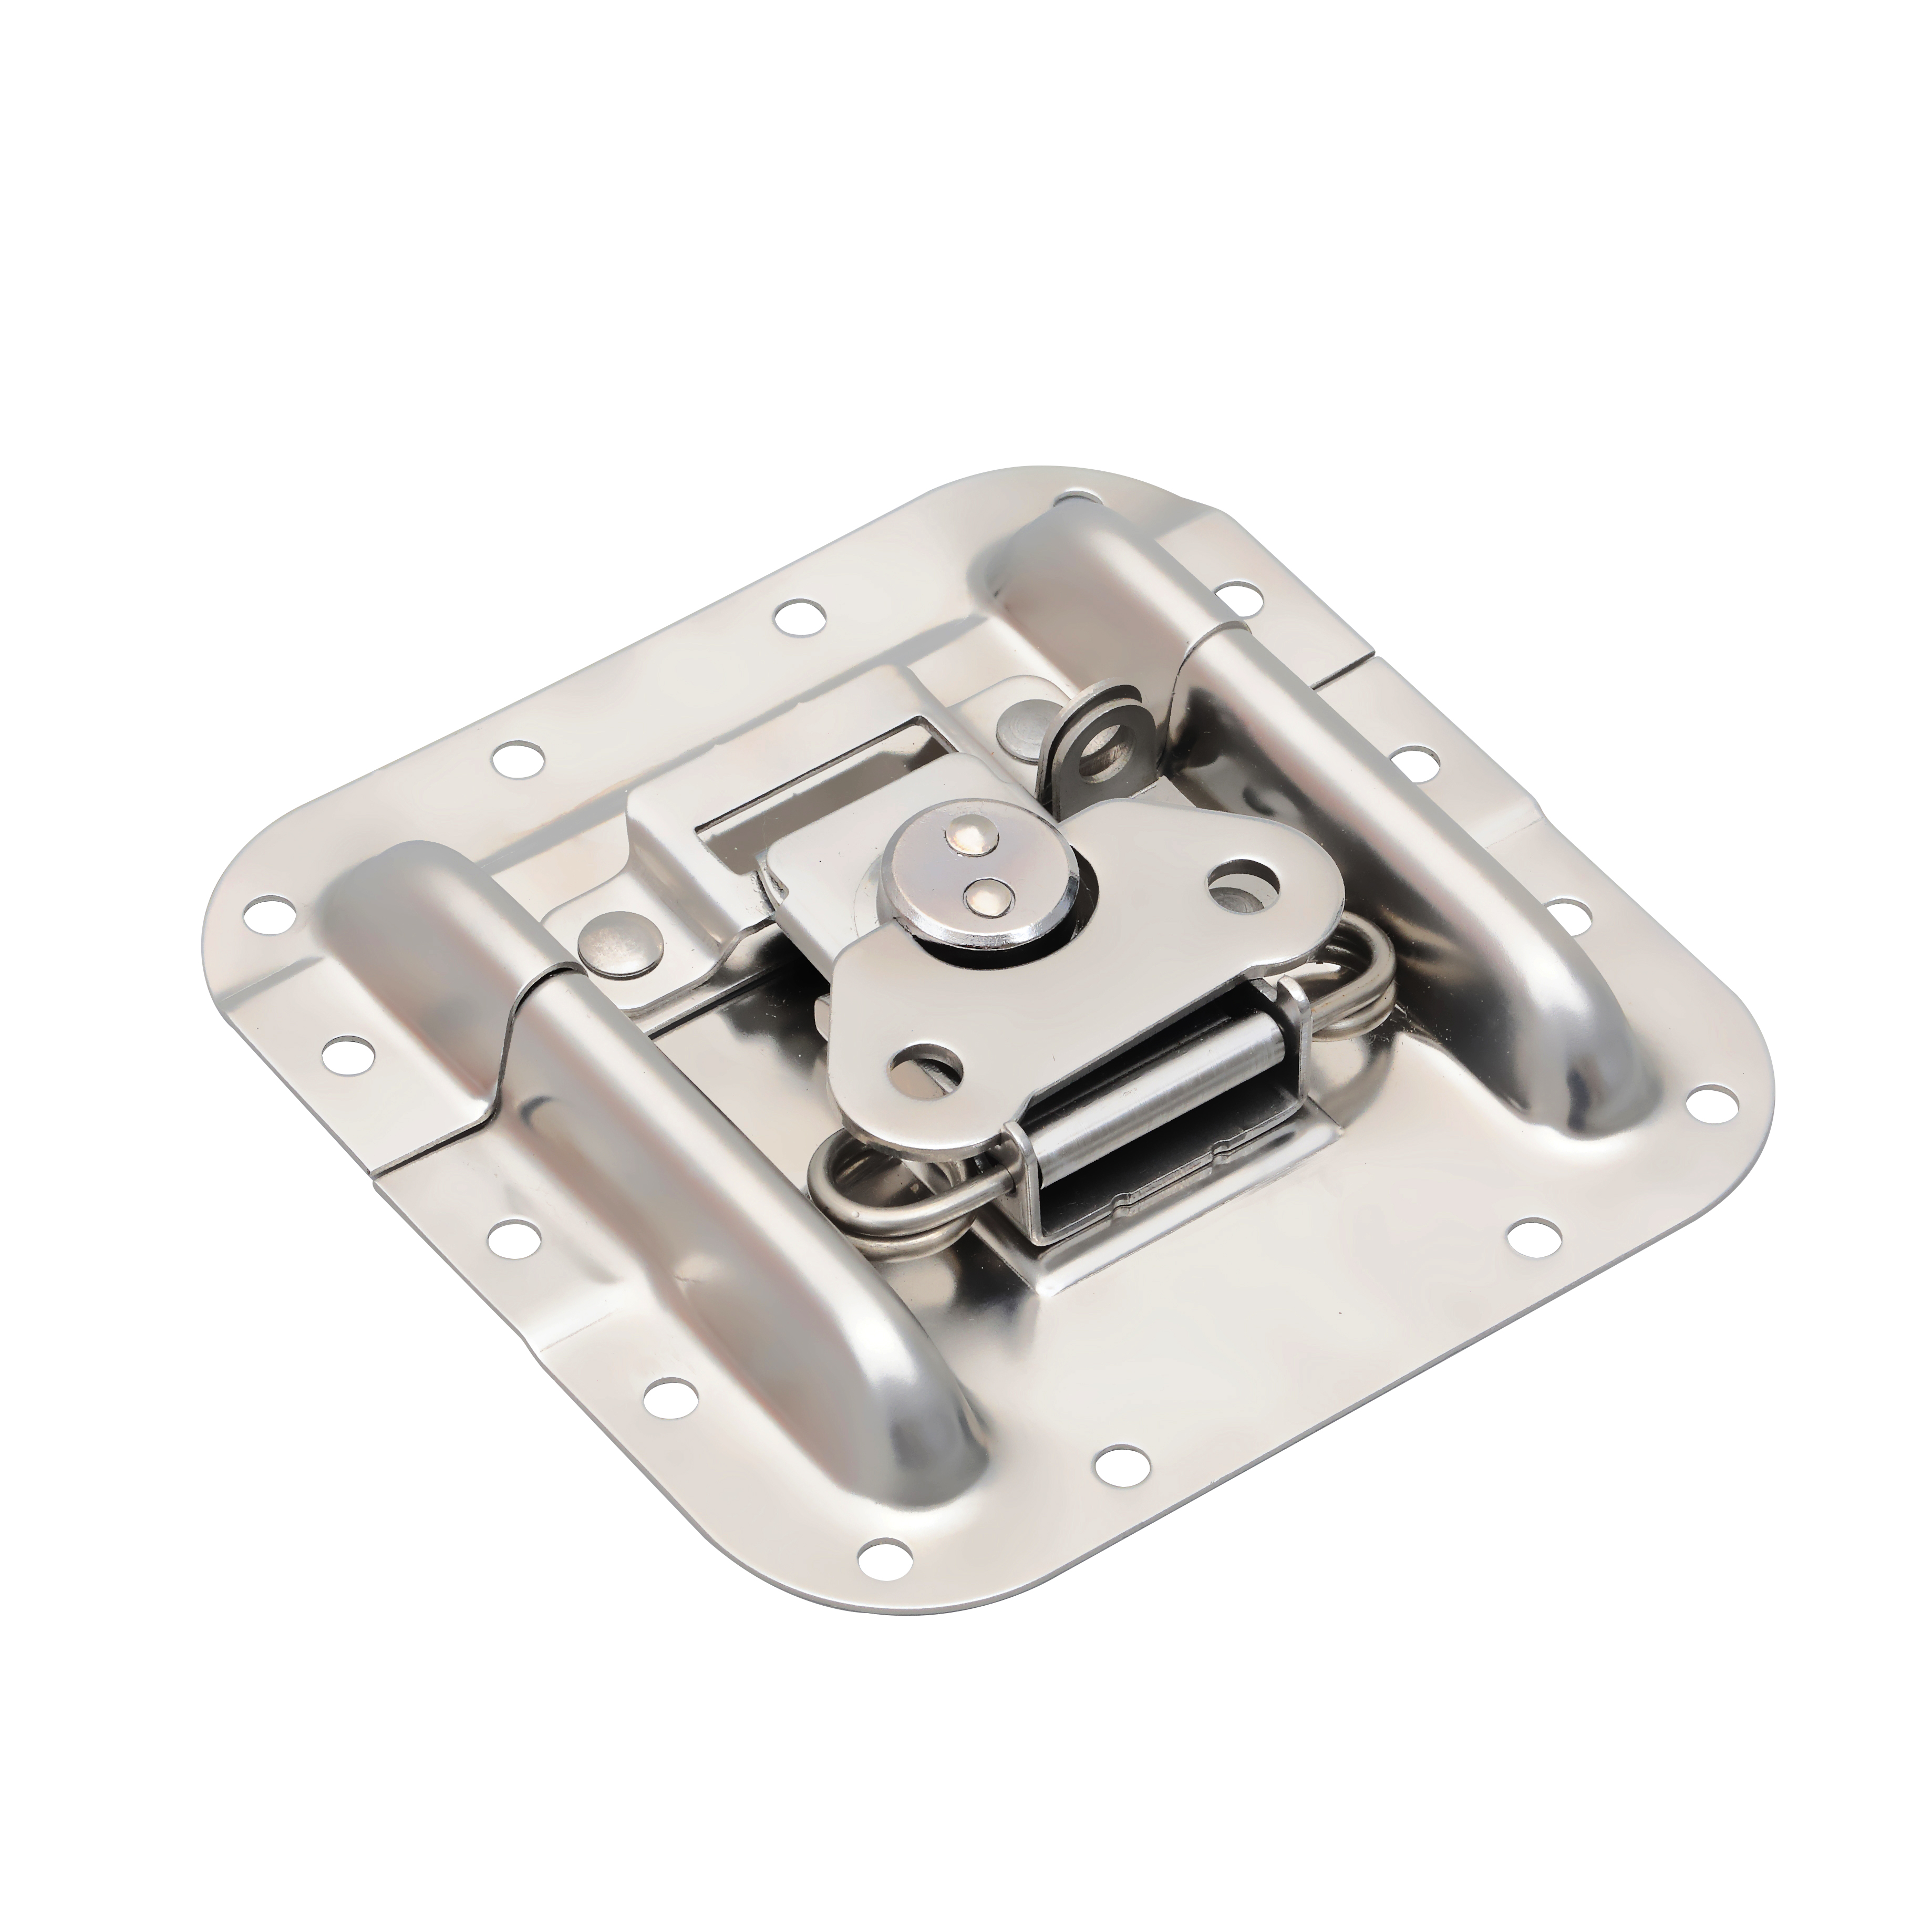 Stainless steel surface latch in dish with ridges